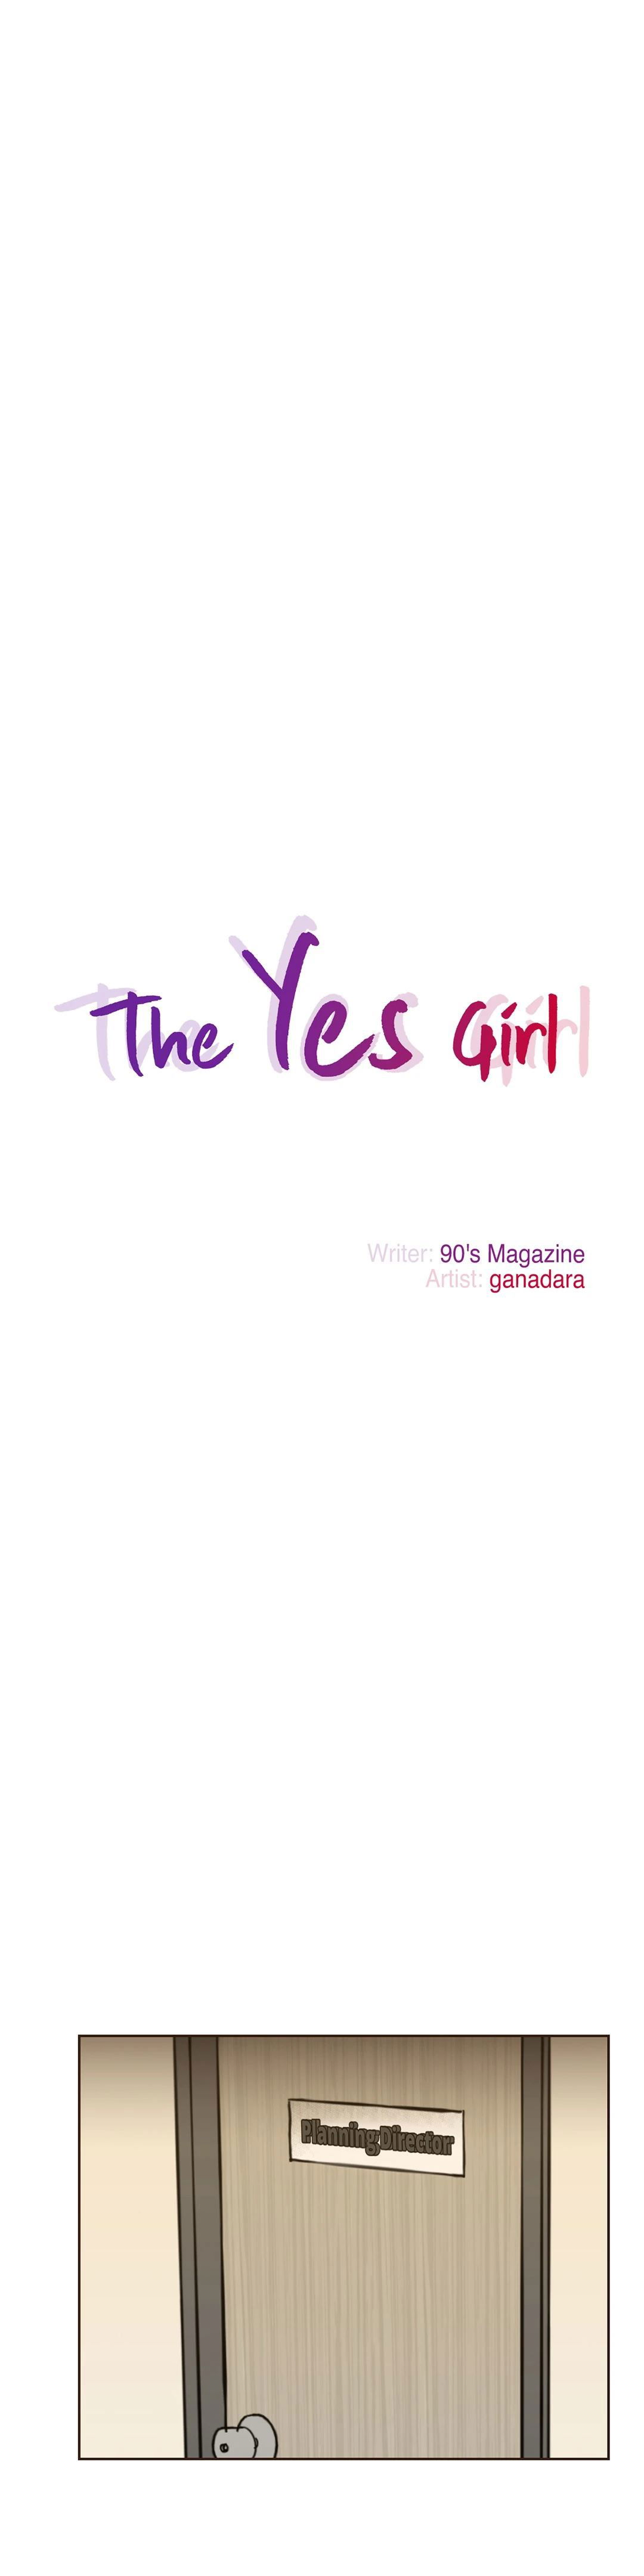 the-yes-girl-chap-54-4